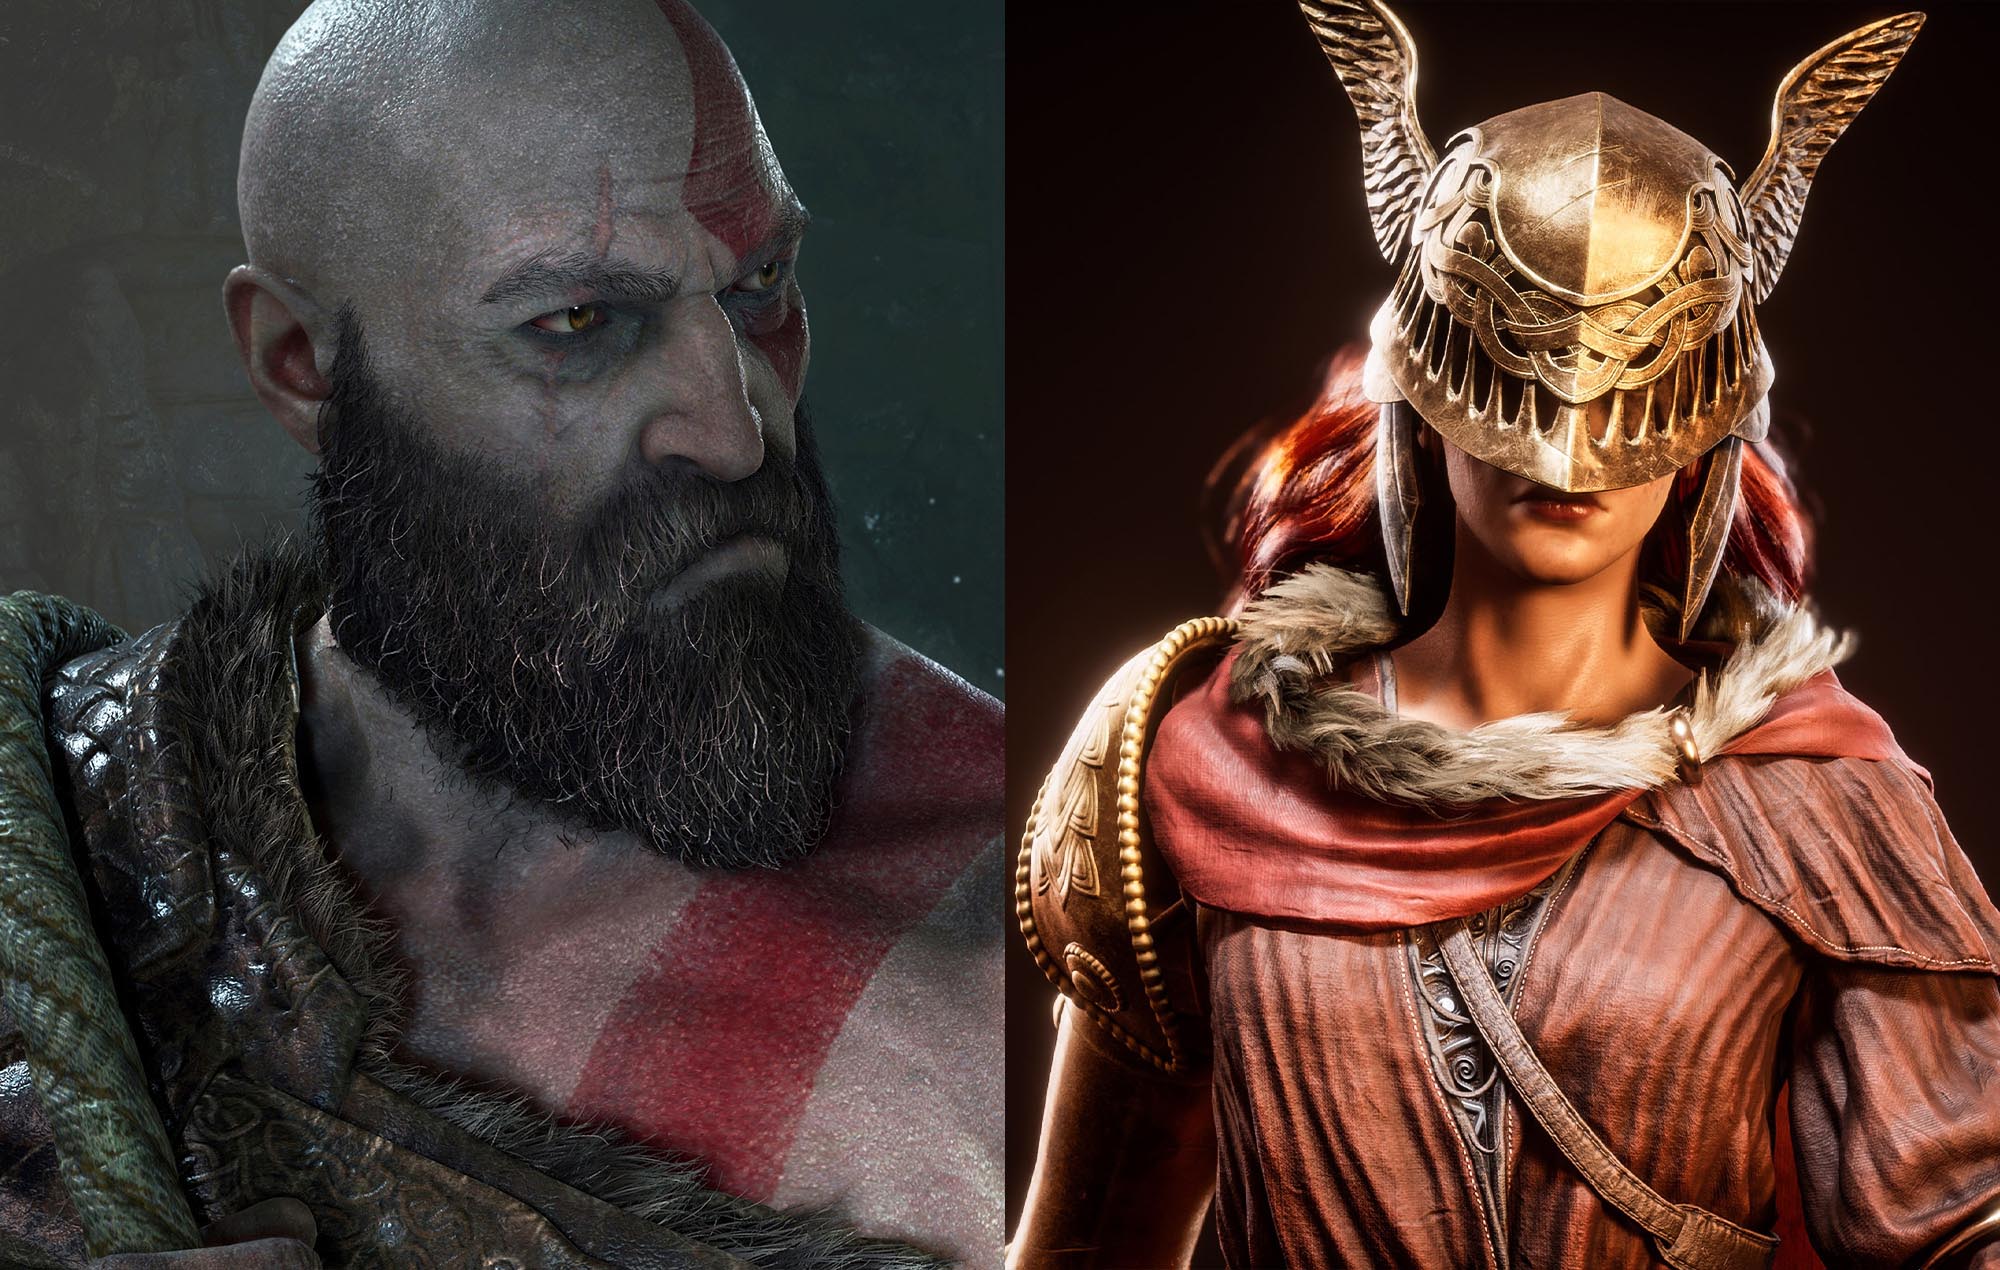 Players debate who would win a match between Malenia from Elden Ring and Kratos from God of War, GamersRD